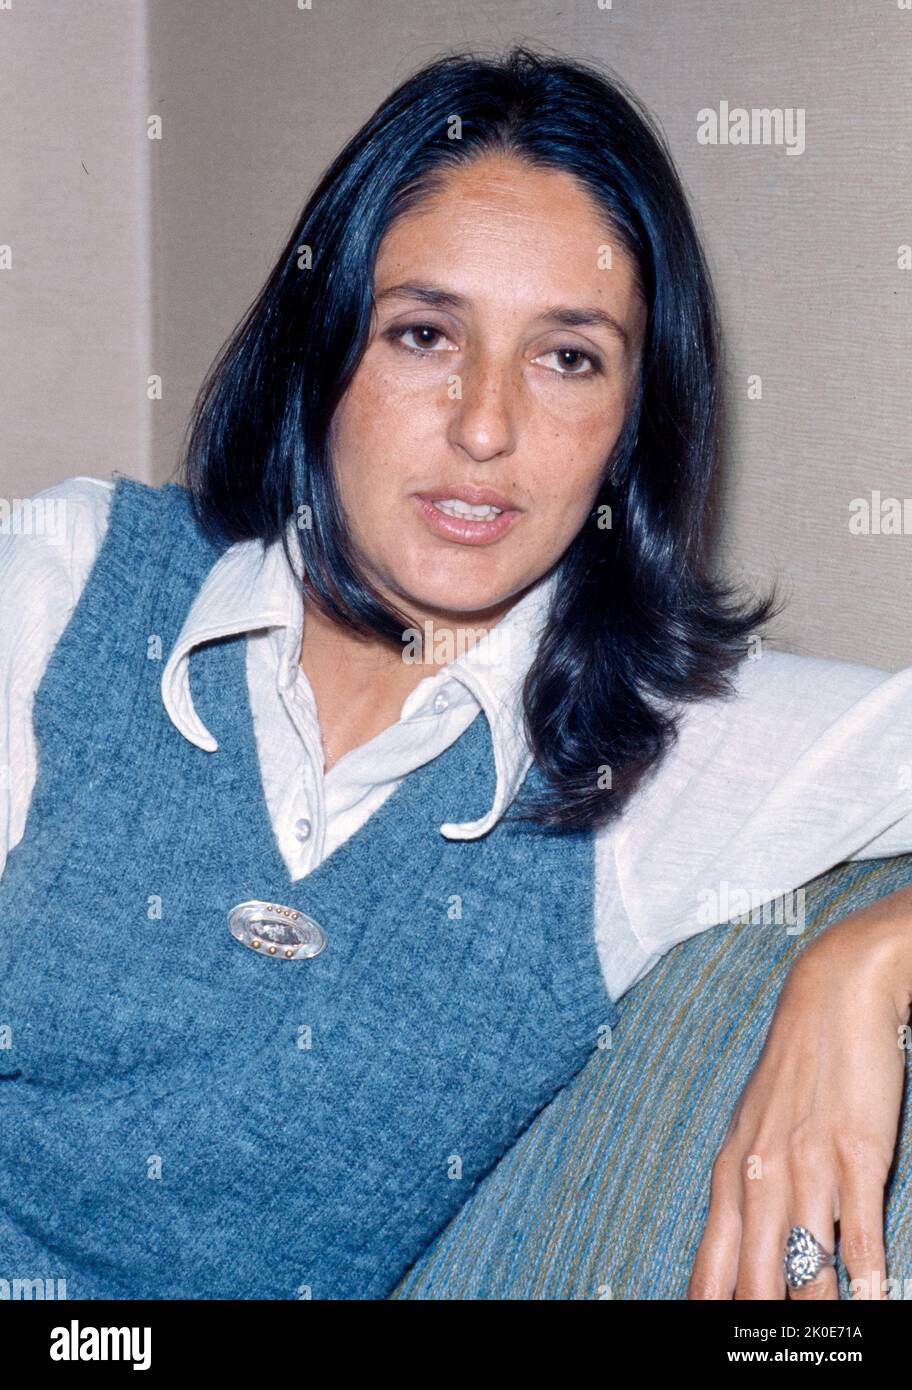 Joan Baez (born 1941) American singer, songwriter, musician, and activist. Baez became more vocal about her disagreement with the Vietnam War. 1972. Stock Photo